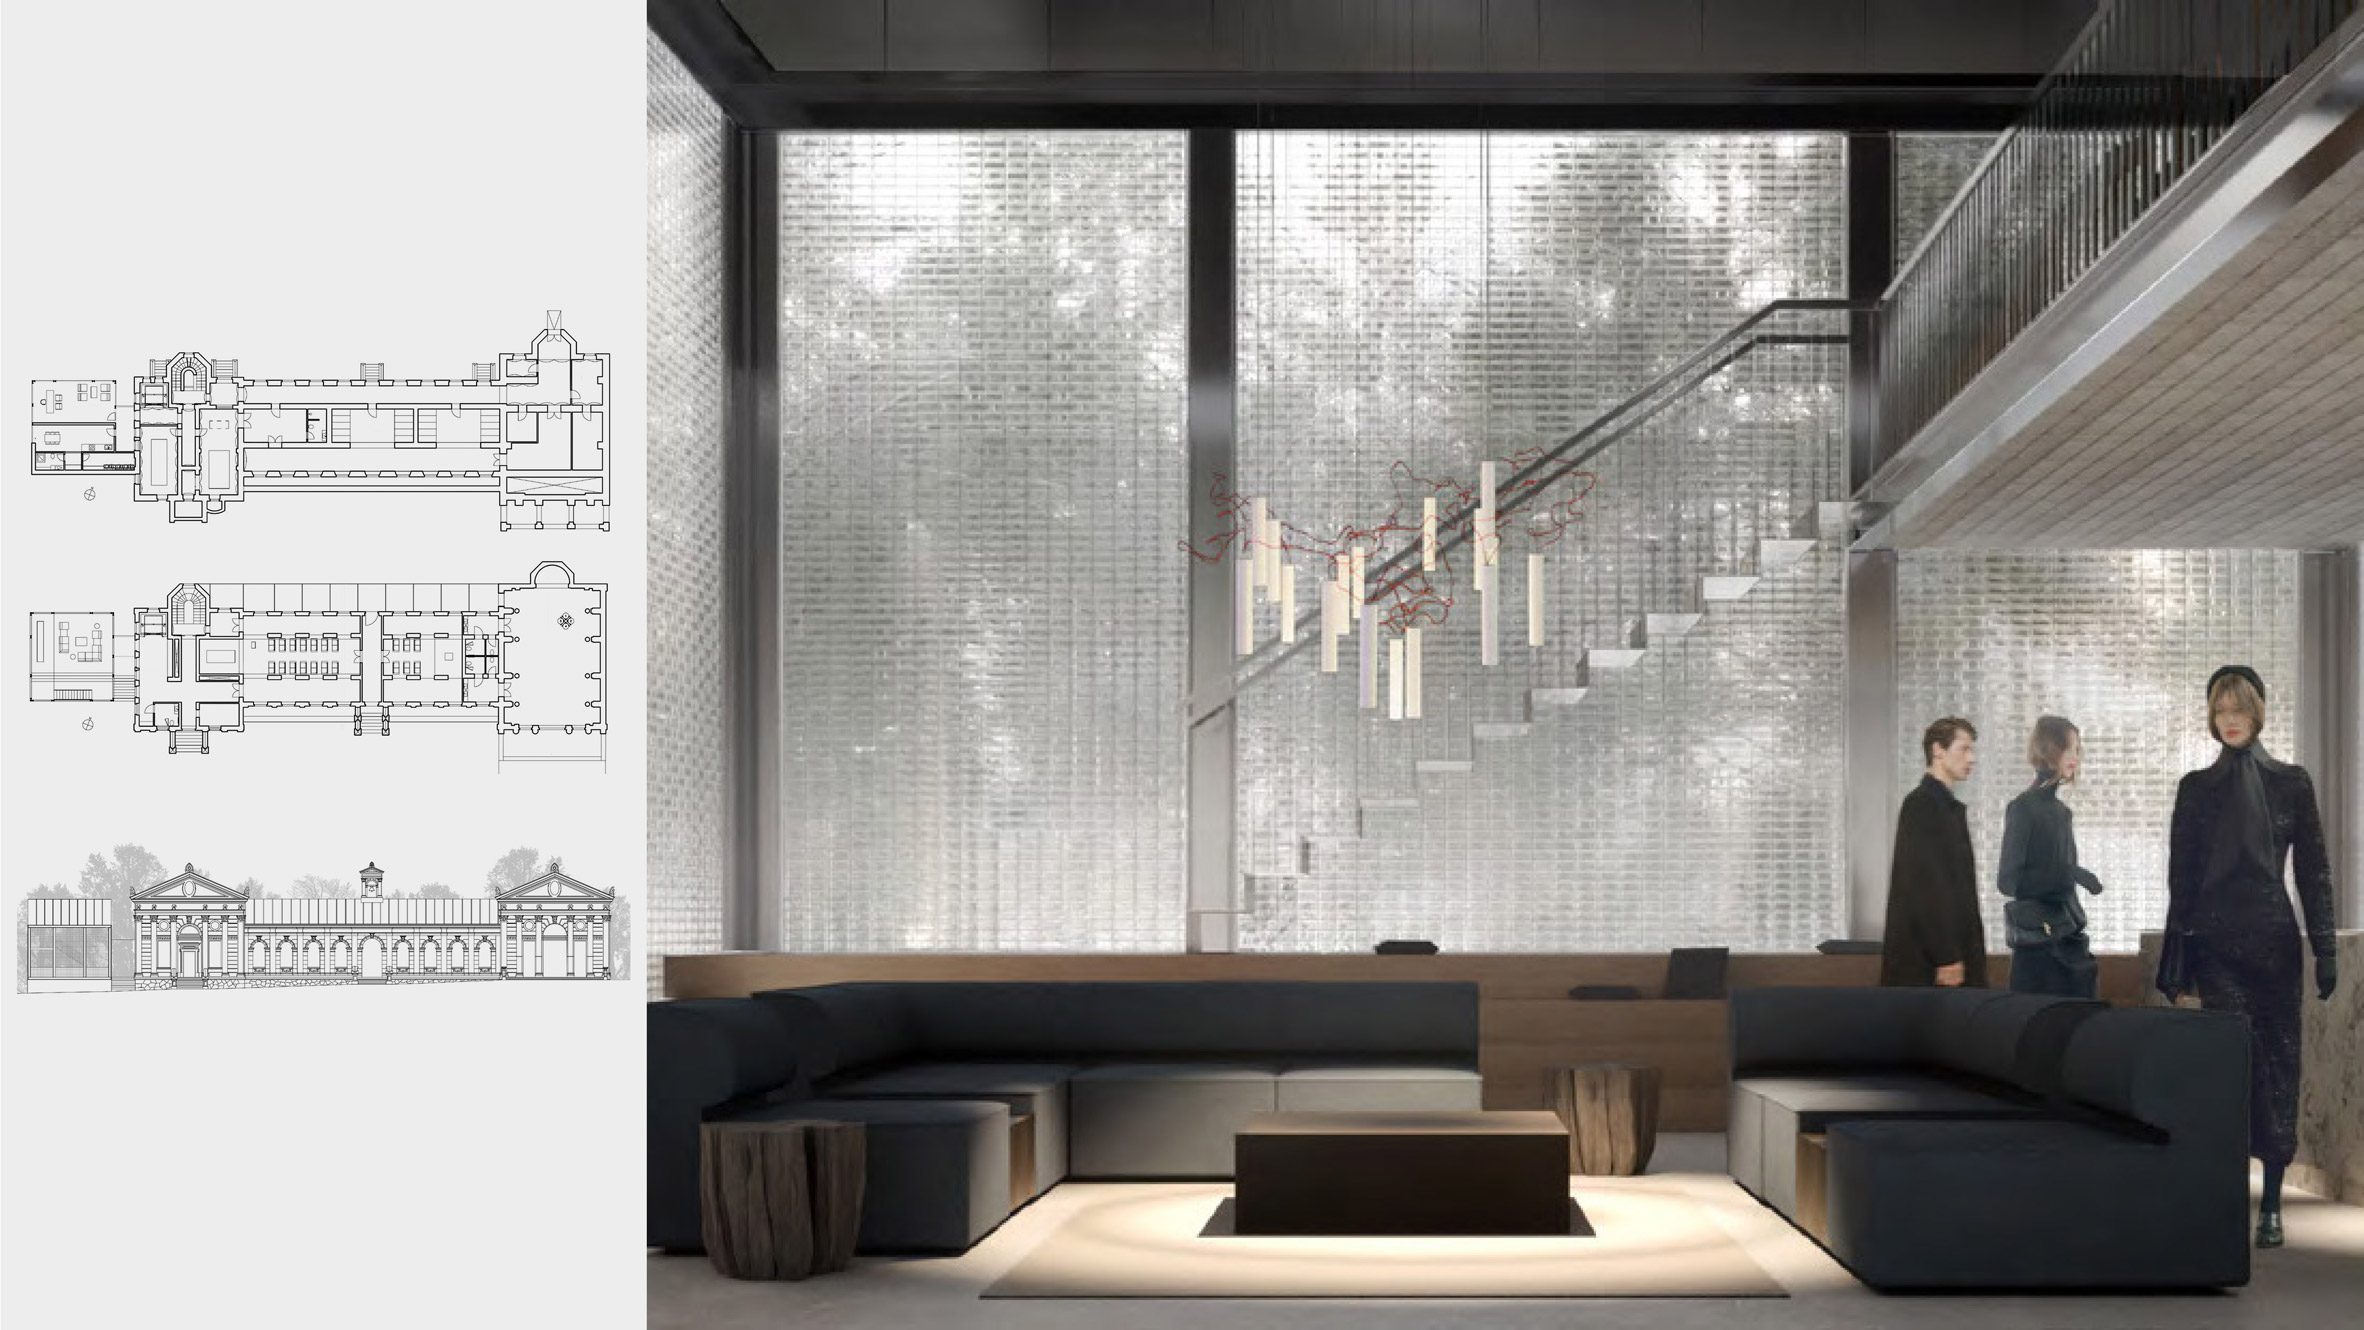 Visualisation of an interior next to elevation and floor plan drawings of a building